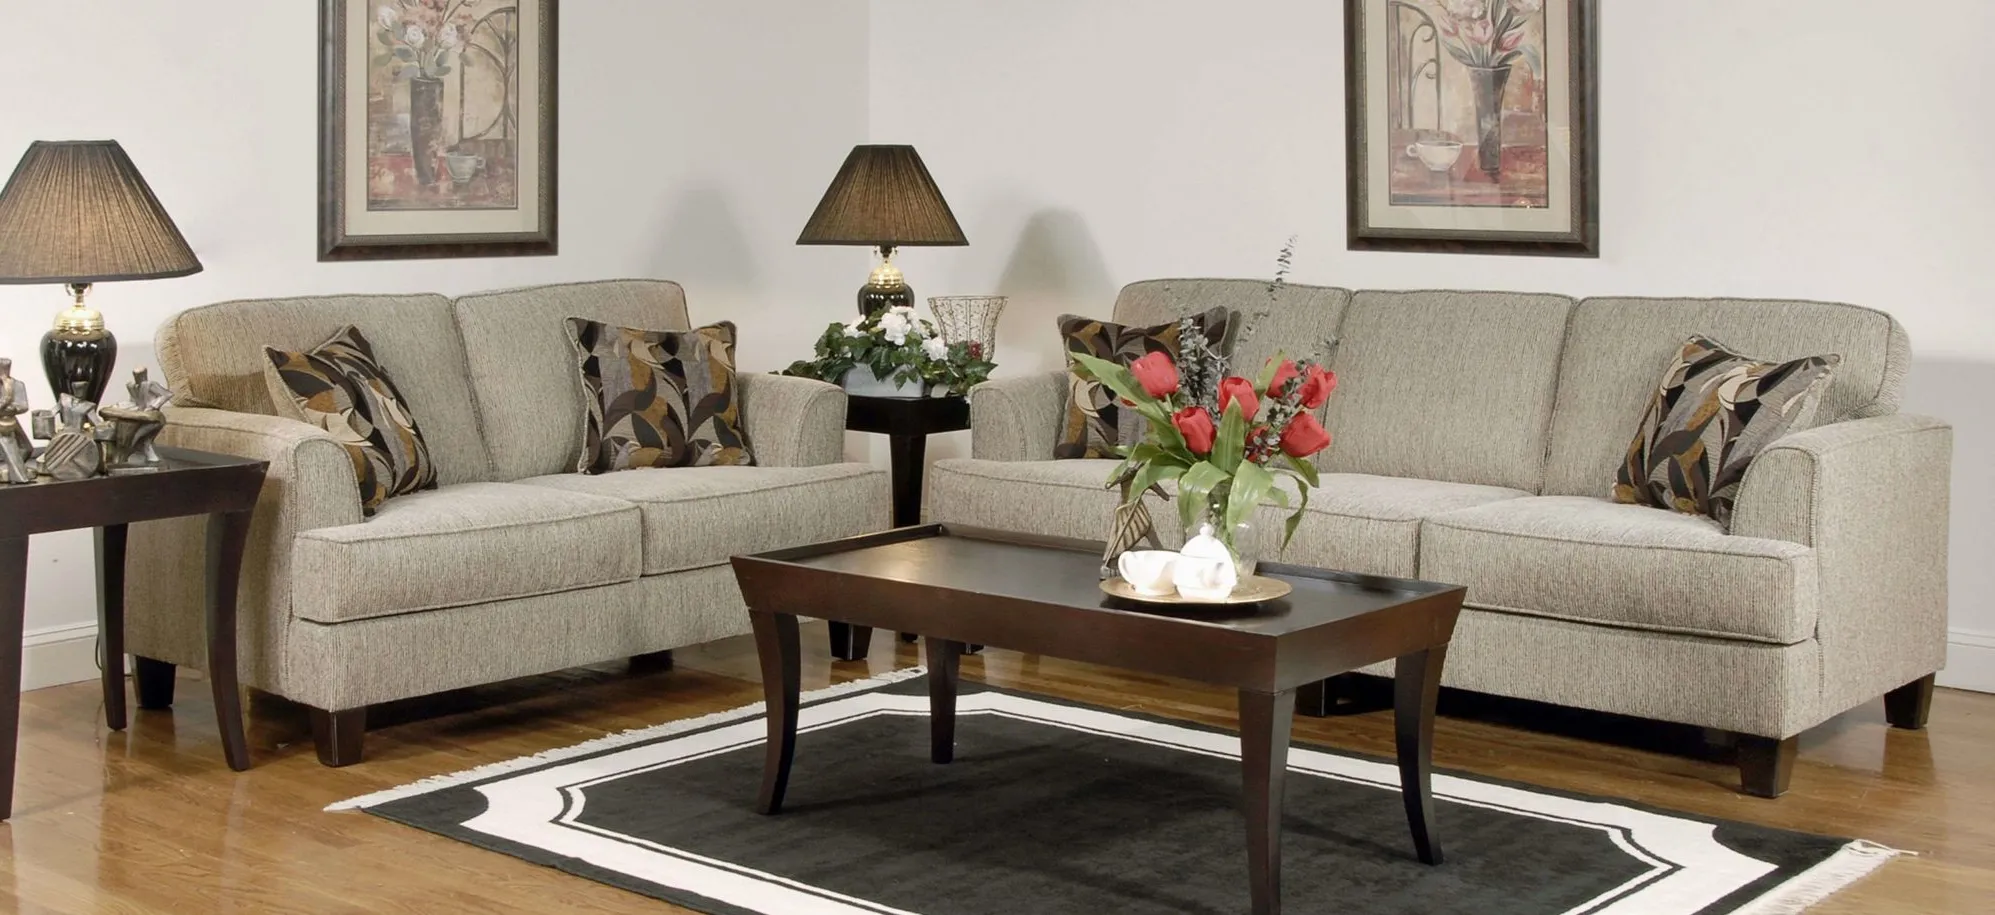 Johnson 2-pc.. Sofa and Loveseat Set in Soprano by Hughes Furniture